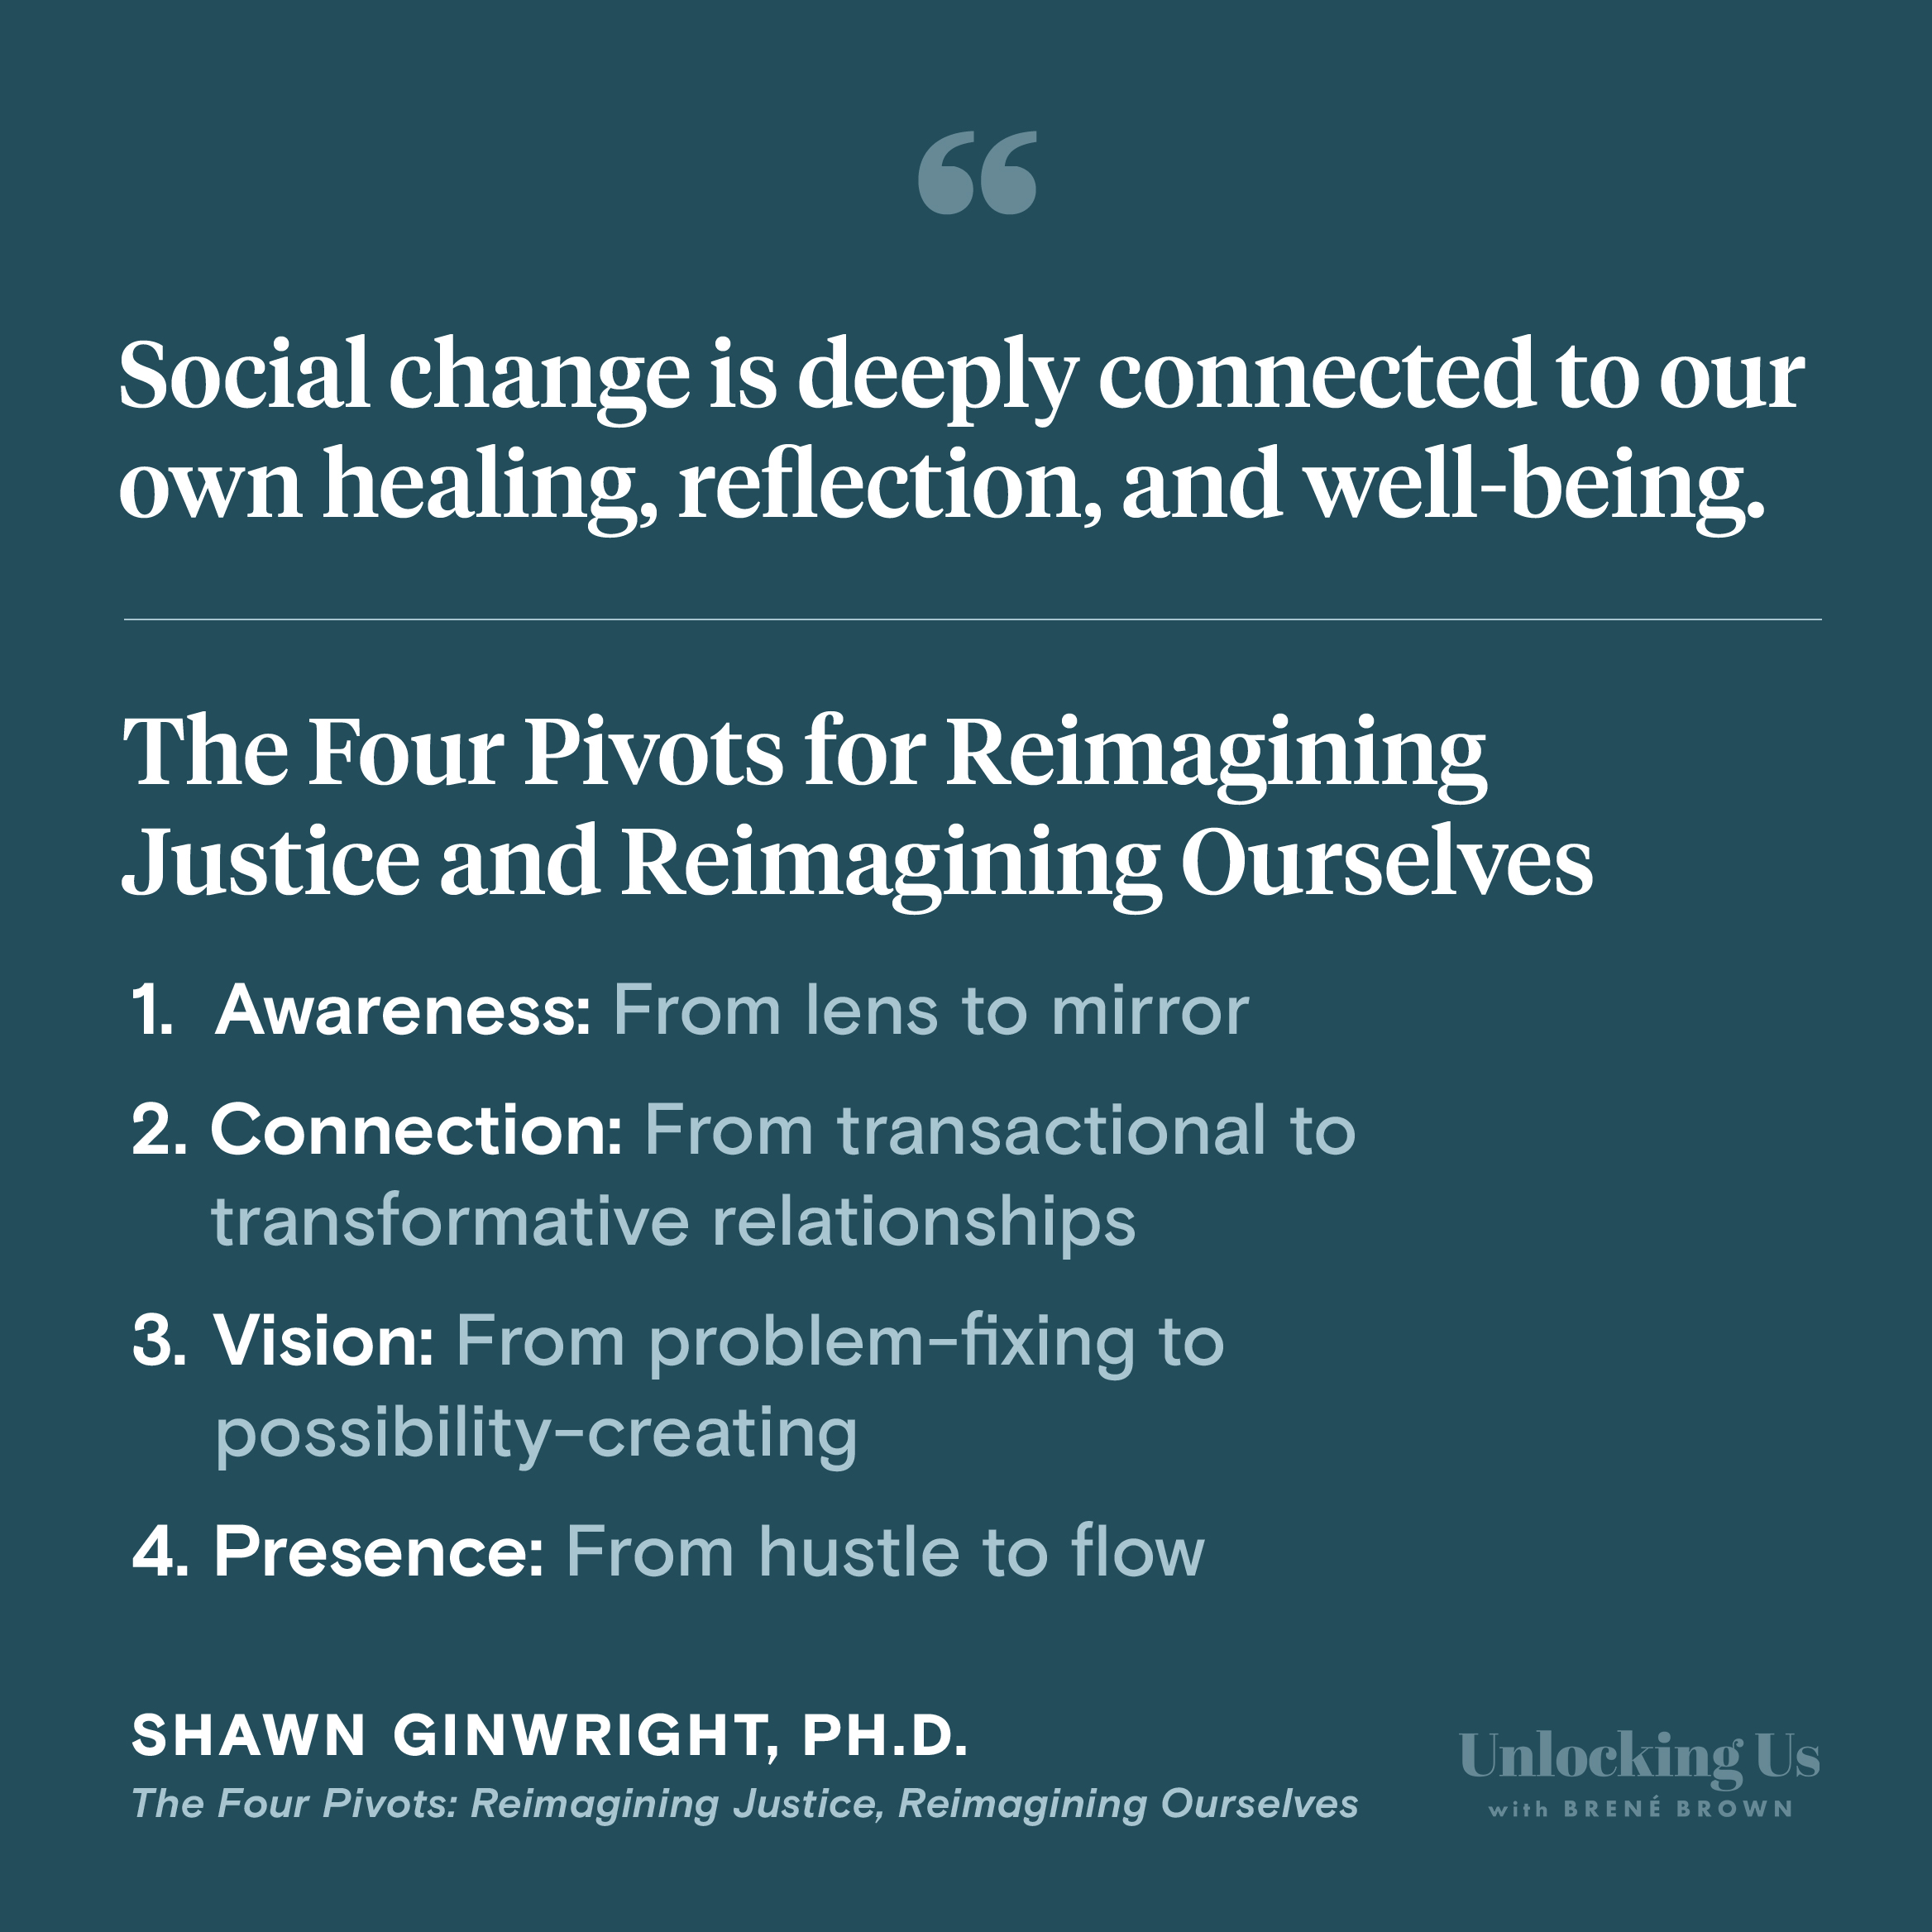 A quote from Shawn Ginwright’s new book, The Four Pivots: Reimagining Justice, Reimagining Ourselves: “Social change is deeply connected to our own healing, reflection, and well-being.” The pivots in the book are: (1) Awareness: From lens to mirror. (2) Connection: From transactional to transformative relationships. (3) Vision: From problem-fixing to possibility-creating. (4) Presence: From hustle to flow.